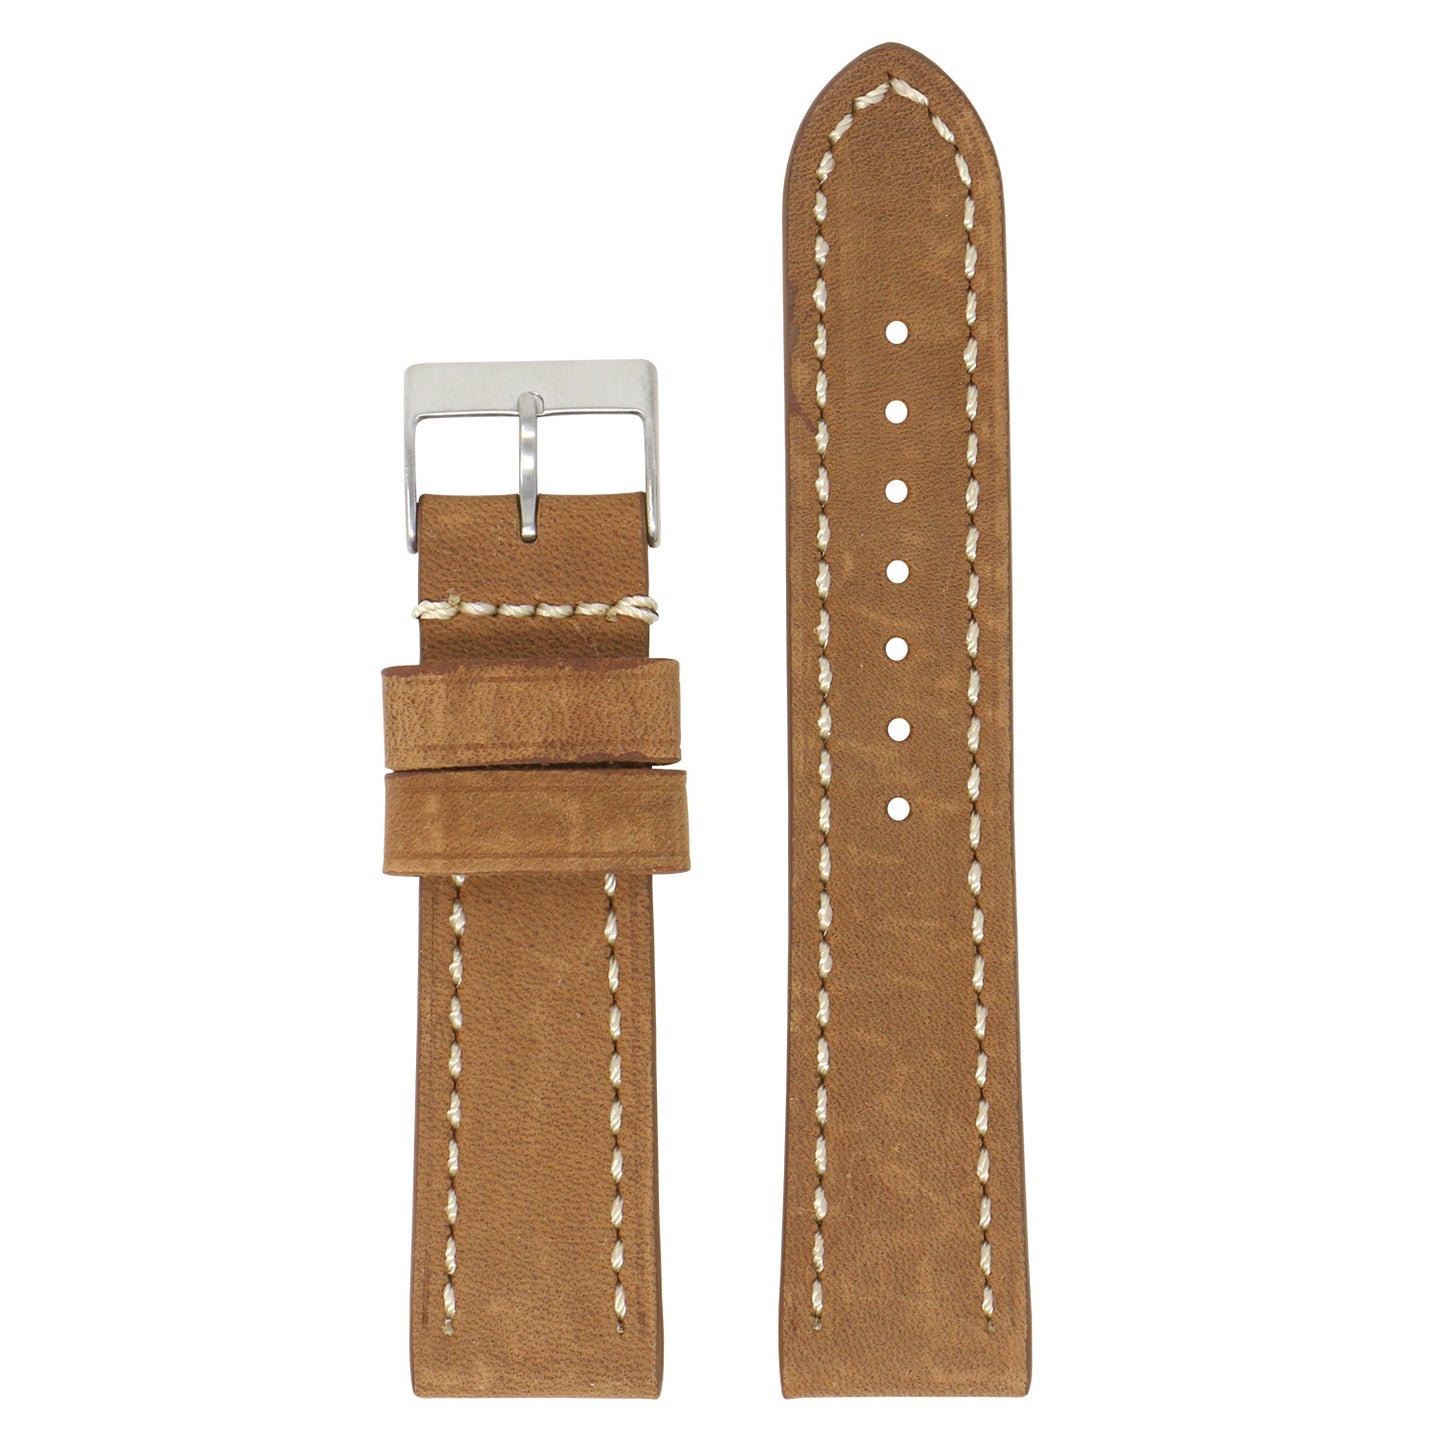 Vintage Leather Strap (Short, Standard, Long) for OnePlus Watch